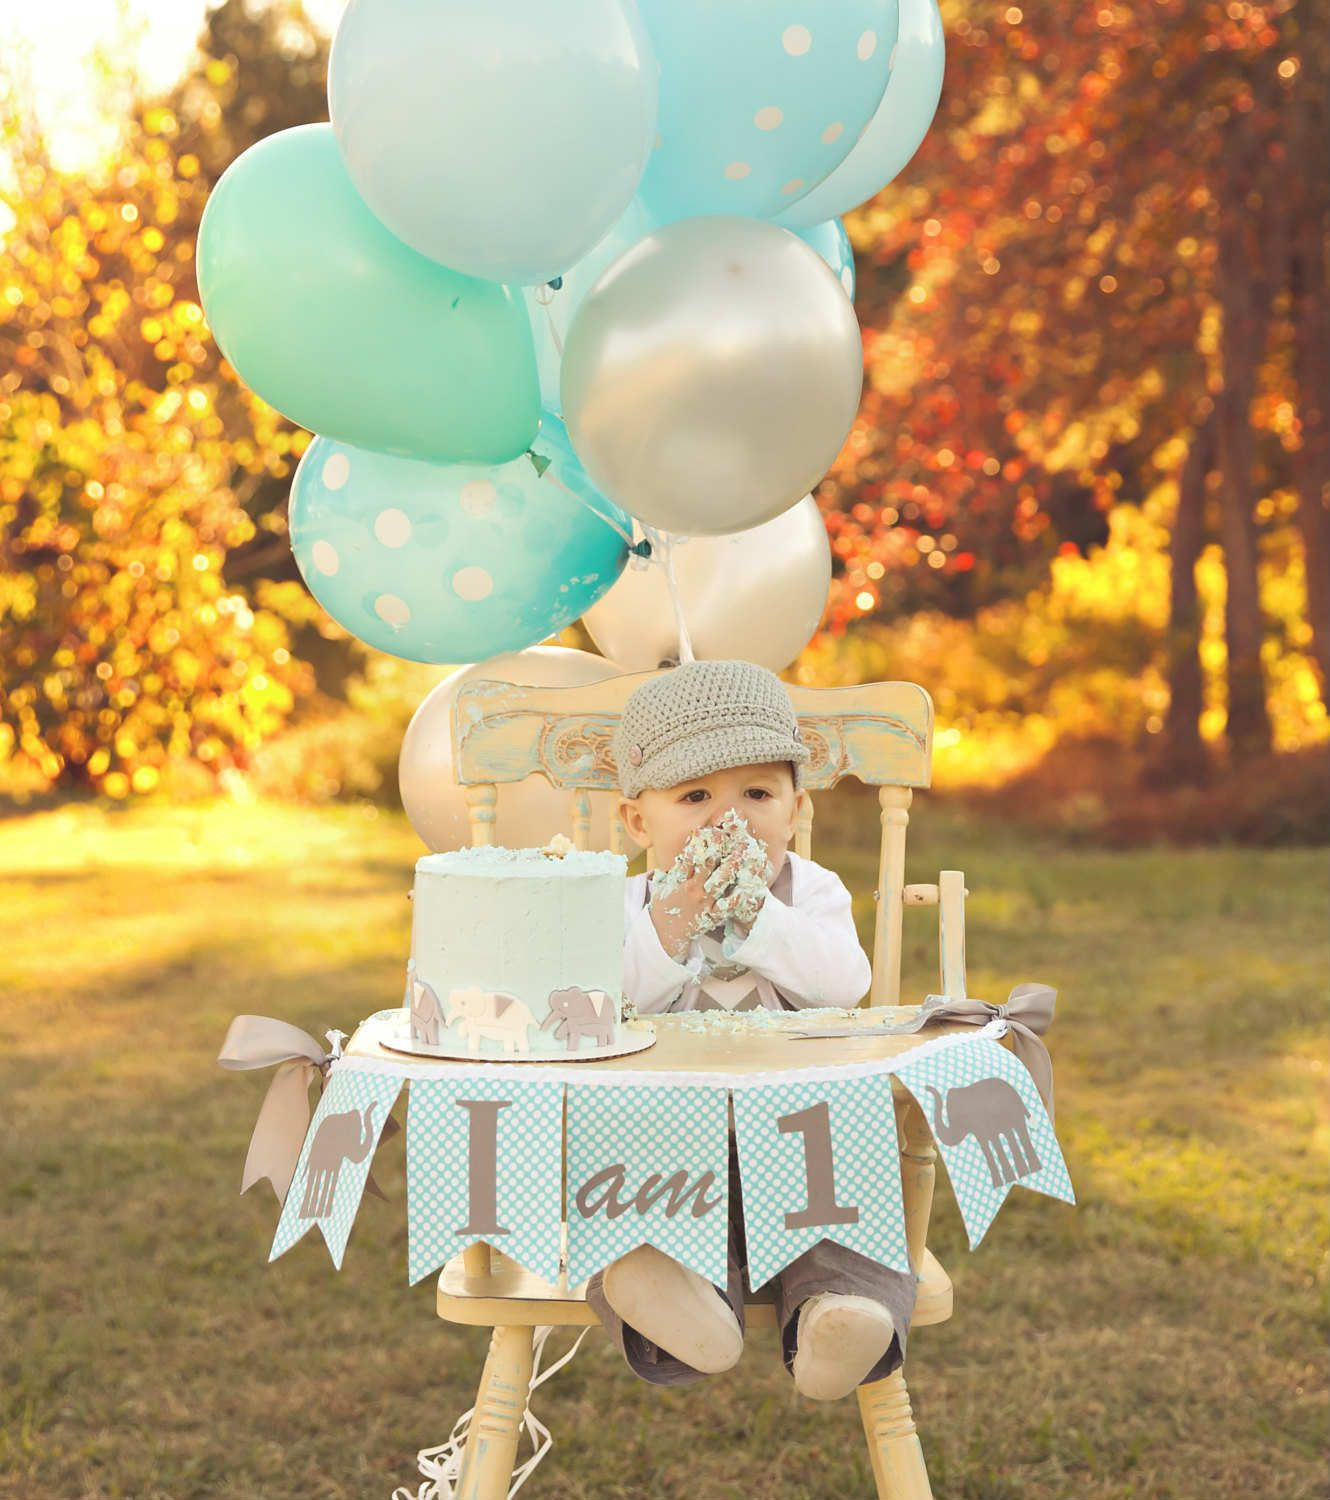 Birthday Party Decoration Ideas For 1 Year Old
 10 1st Birthday Party Ideas for Boys Part 2